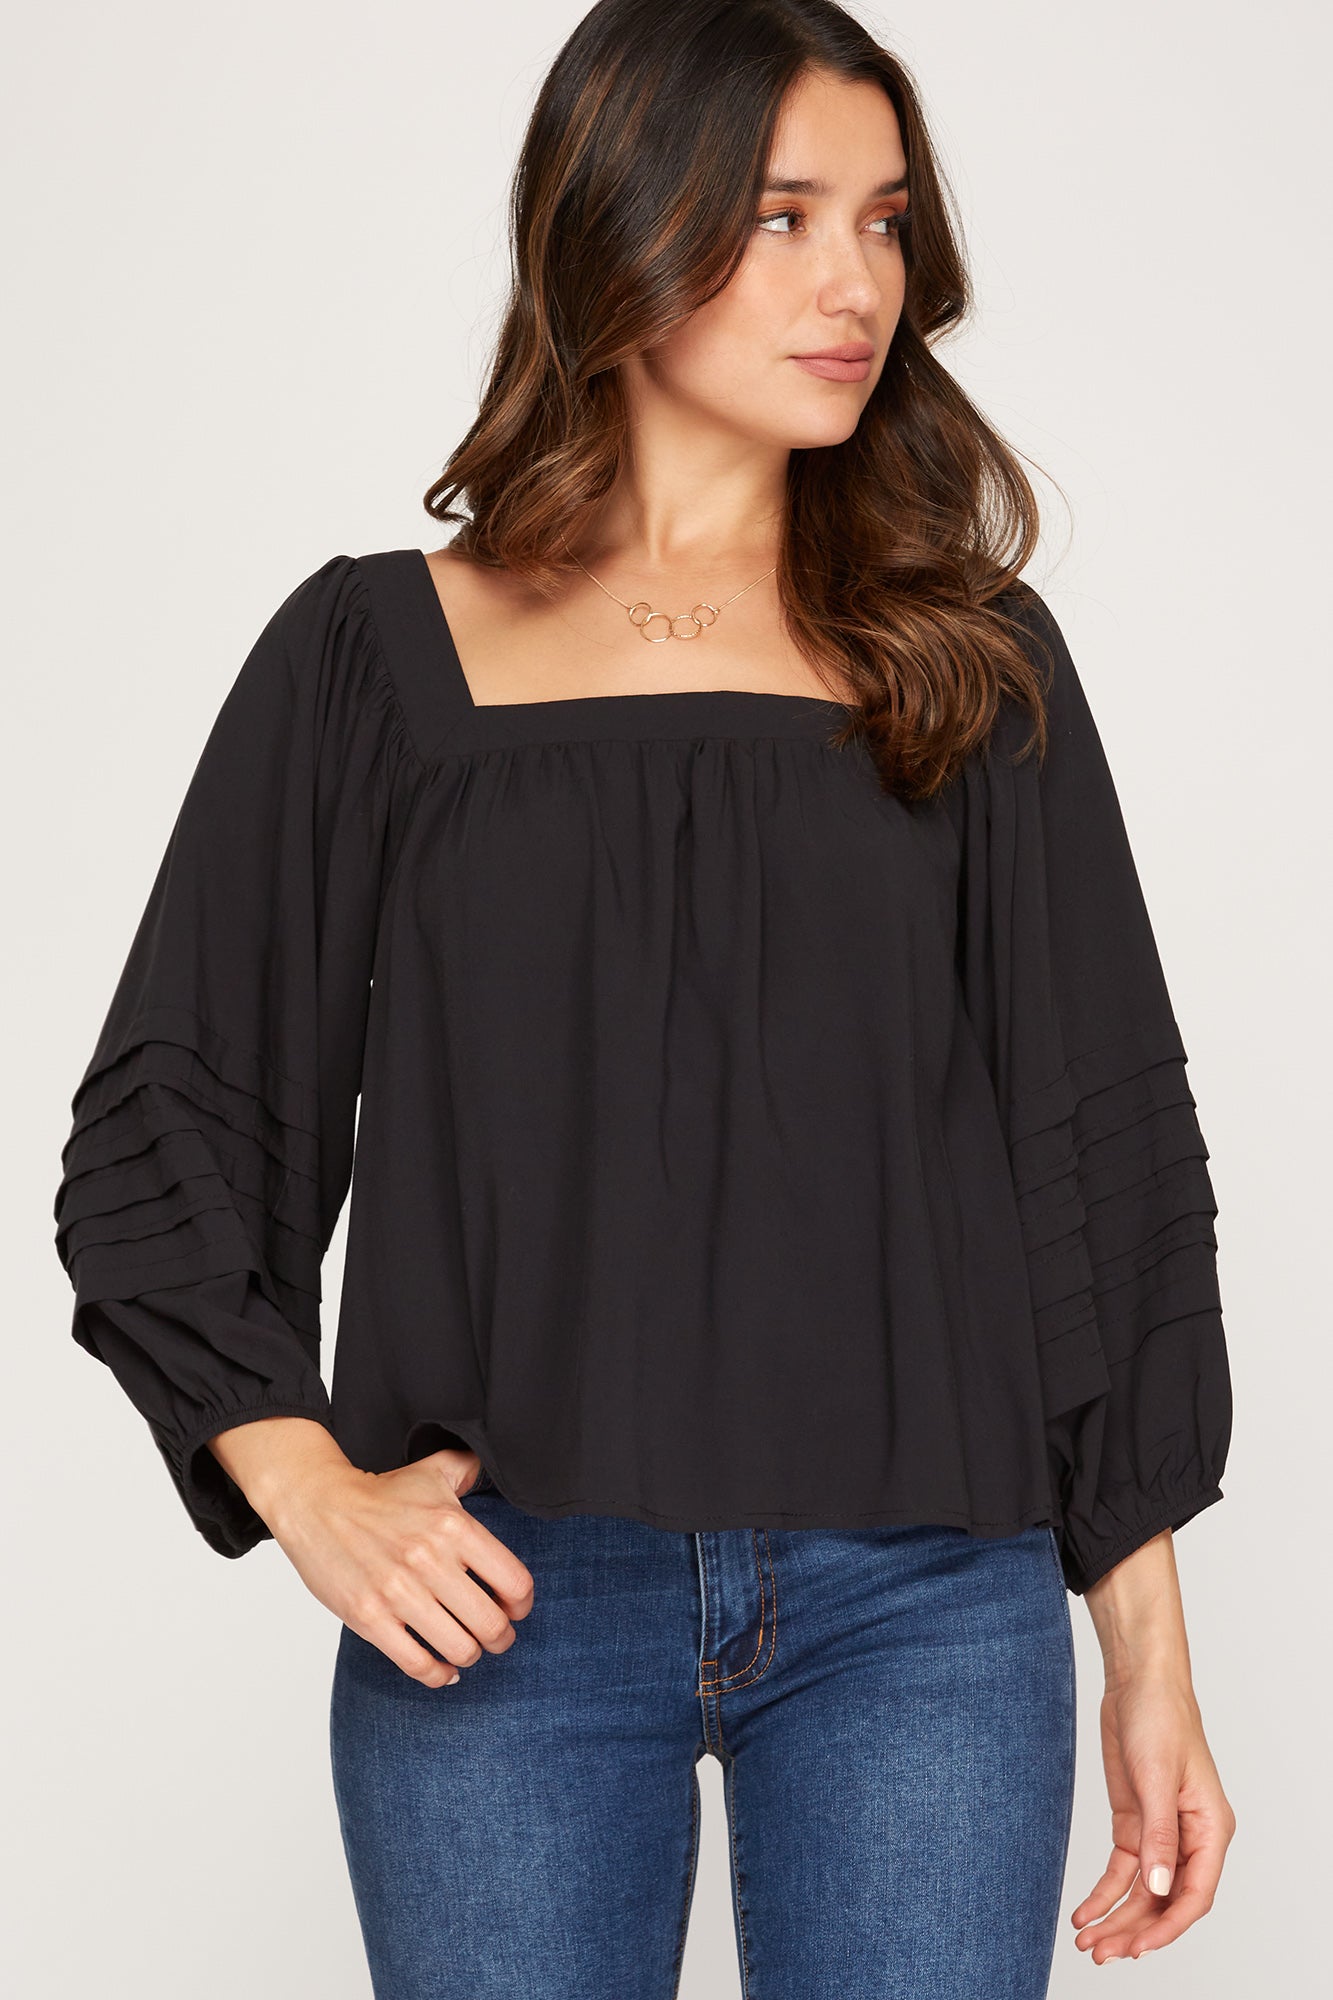 3/4 Black Pleated Sleeve Square Neck Top!